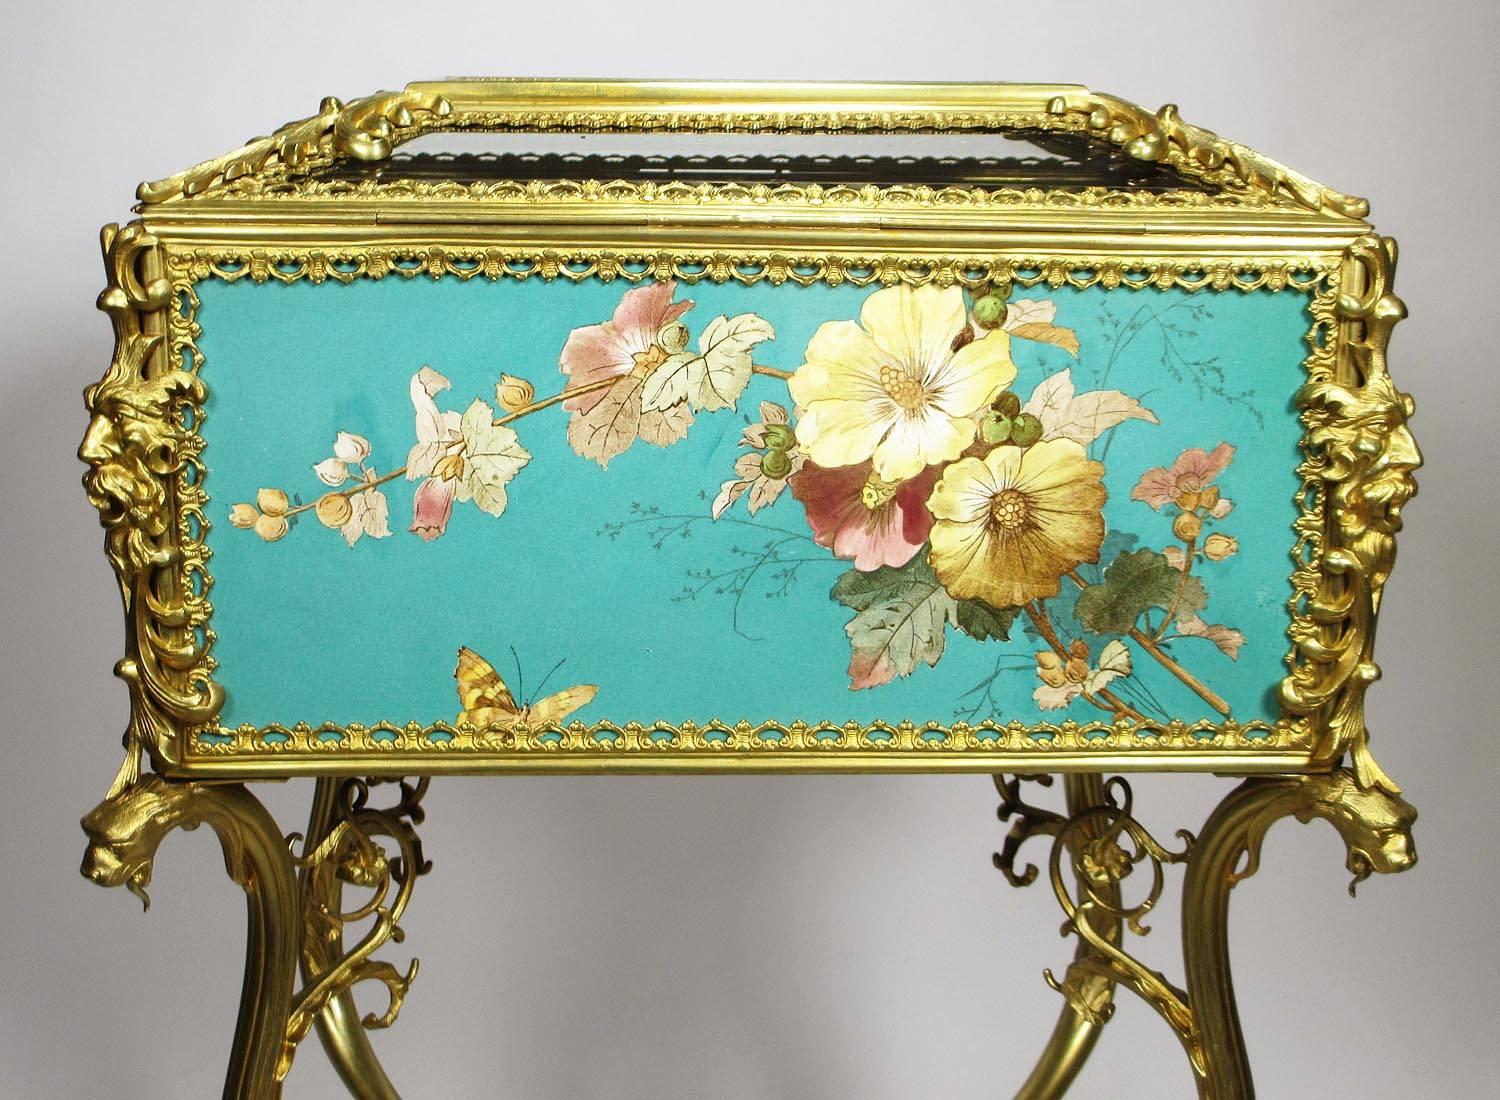 Superb Early 20th Century Aesthetic Movement Majolica & Gilt-Metal Jewelry Box 1